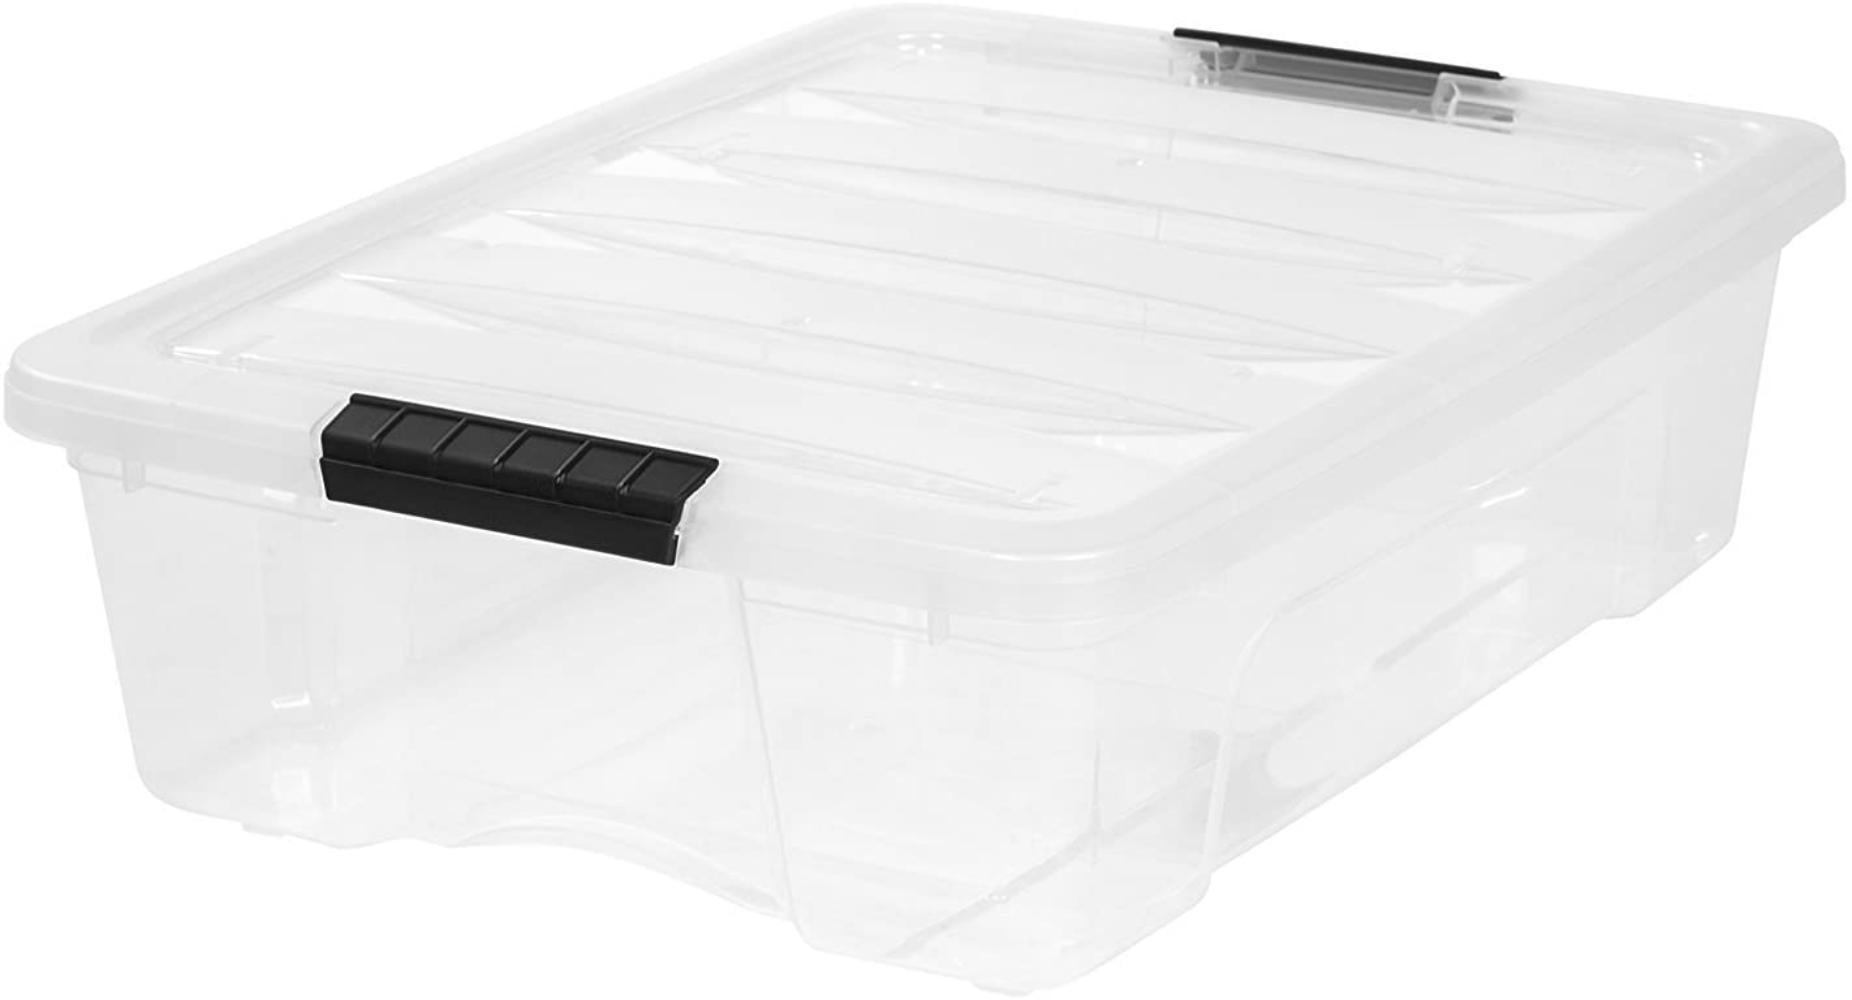 Large Plastic Storage Tote 53 Qt Container Home Stackable Box Lid PVC Bin Clear 